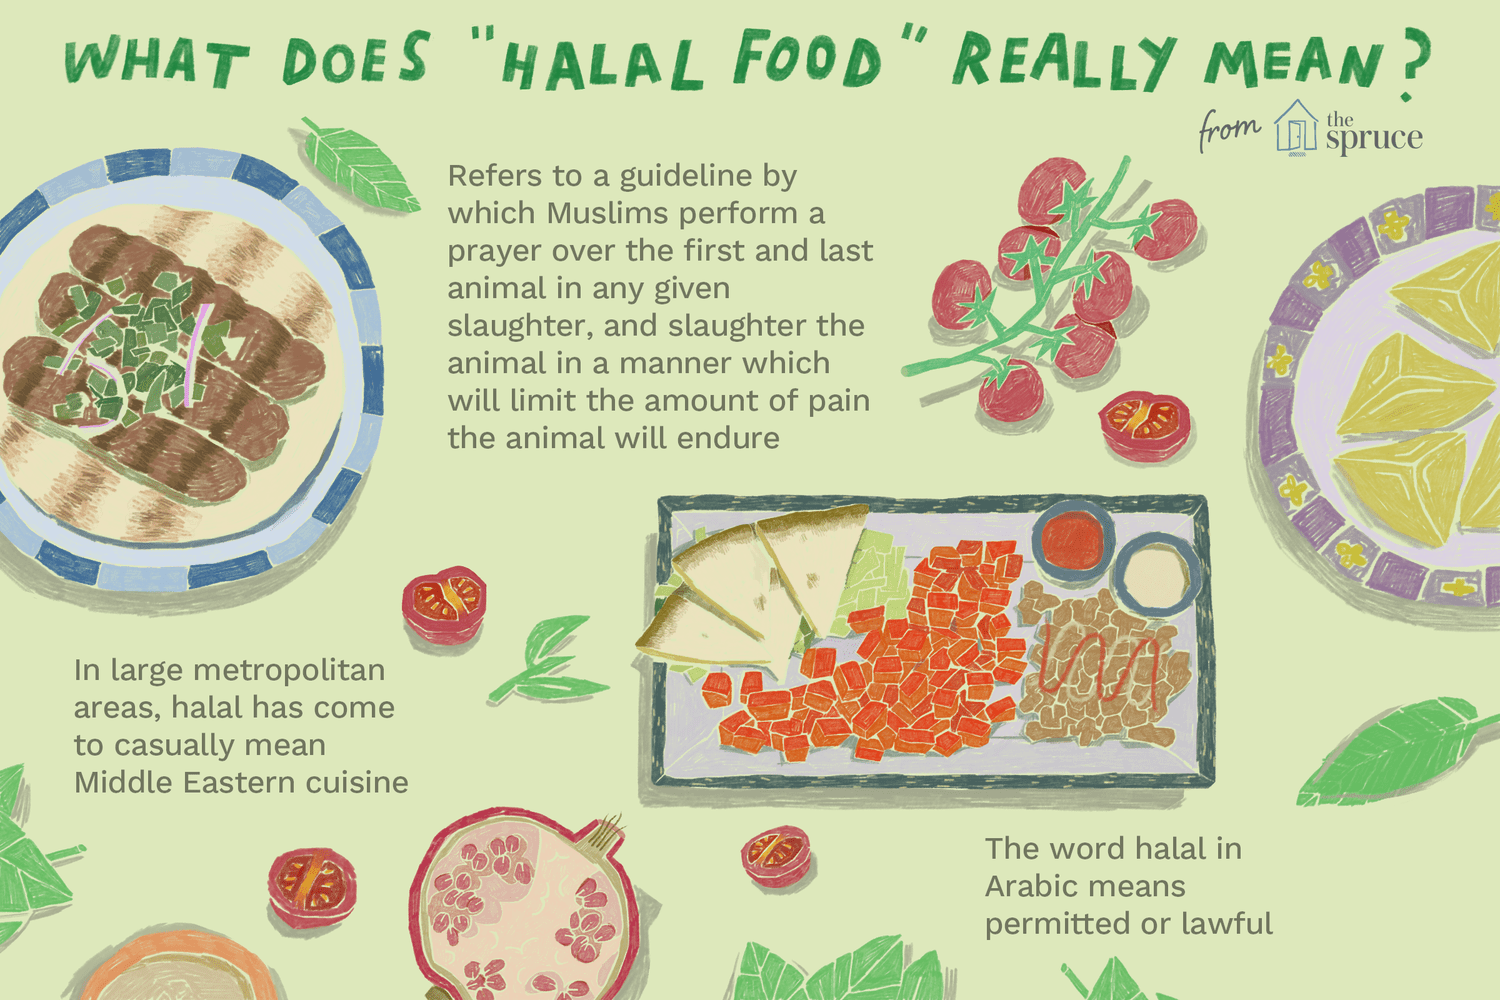 What is Halal food